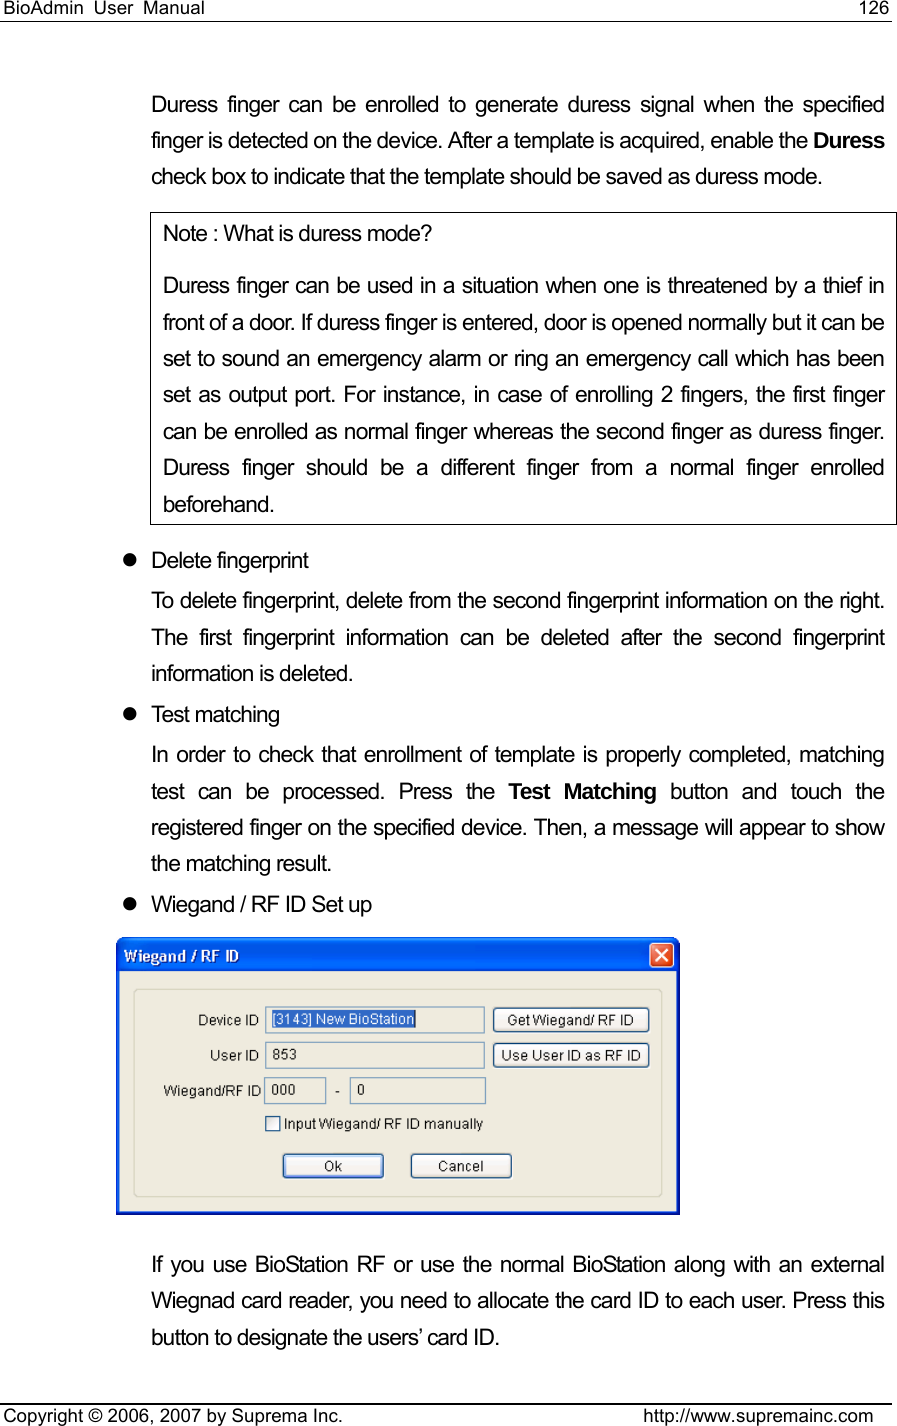 BioAdmin User Manual                                                                     126   Copyright © 2006, 2007 by Suprema Inc.                                http://www.supremainc.com Duress finger can be enrolled to generate duress signal when the specified finger is detected on the device. After a template is acquired, enable the Duress check box to indicate that the template should be saved as duress mode. Note : What is duress mode?   Duress finger can be used in a situation when one is threatened by a thief in front of a door. If duress finger is entered, door is opened normally but it can be set to sound an emergency alarm or ring an emergency call which has been set as output port. For instance, in case of enrolling 2 fingers, the first finger can be enrolled as normal finger whereas the second finger as duress finger. Duress finger should be a different finger from a normal finger enrolled beforehand.  z Delete fingerprint To delete fingerprint, delete from the second fingerprint information on the right. The first fingerprint information can be deleted after the second fingerprint information is deleted. z Test matching In order to check that enrollment of template is properly completed, matching test can be processed. Press the Test Matching button and touch the registered finger on the specified device. Then, a message will appear to show the matching result. z  Wiegand / RF ID Set up  If you use BioStation RF or use the normal BioStation along with an external Wiegnad card reader, you need to allocate the card ID to each user. Press this button to designate the users’ card ID. 